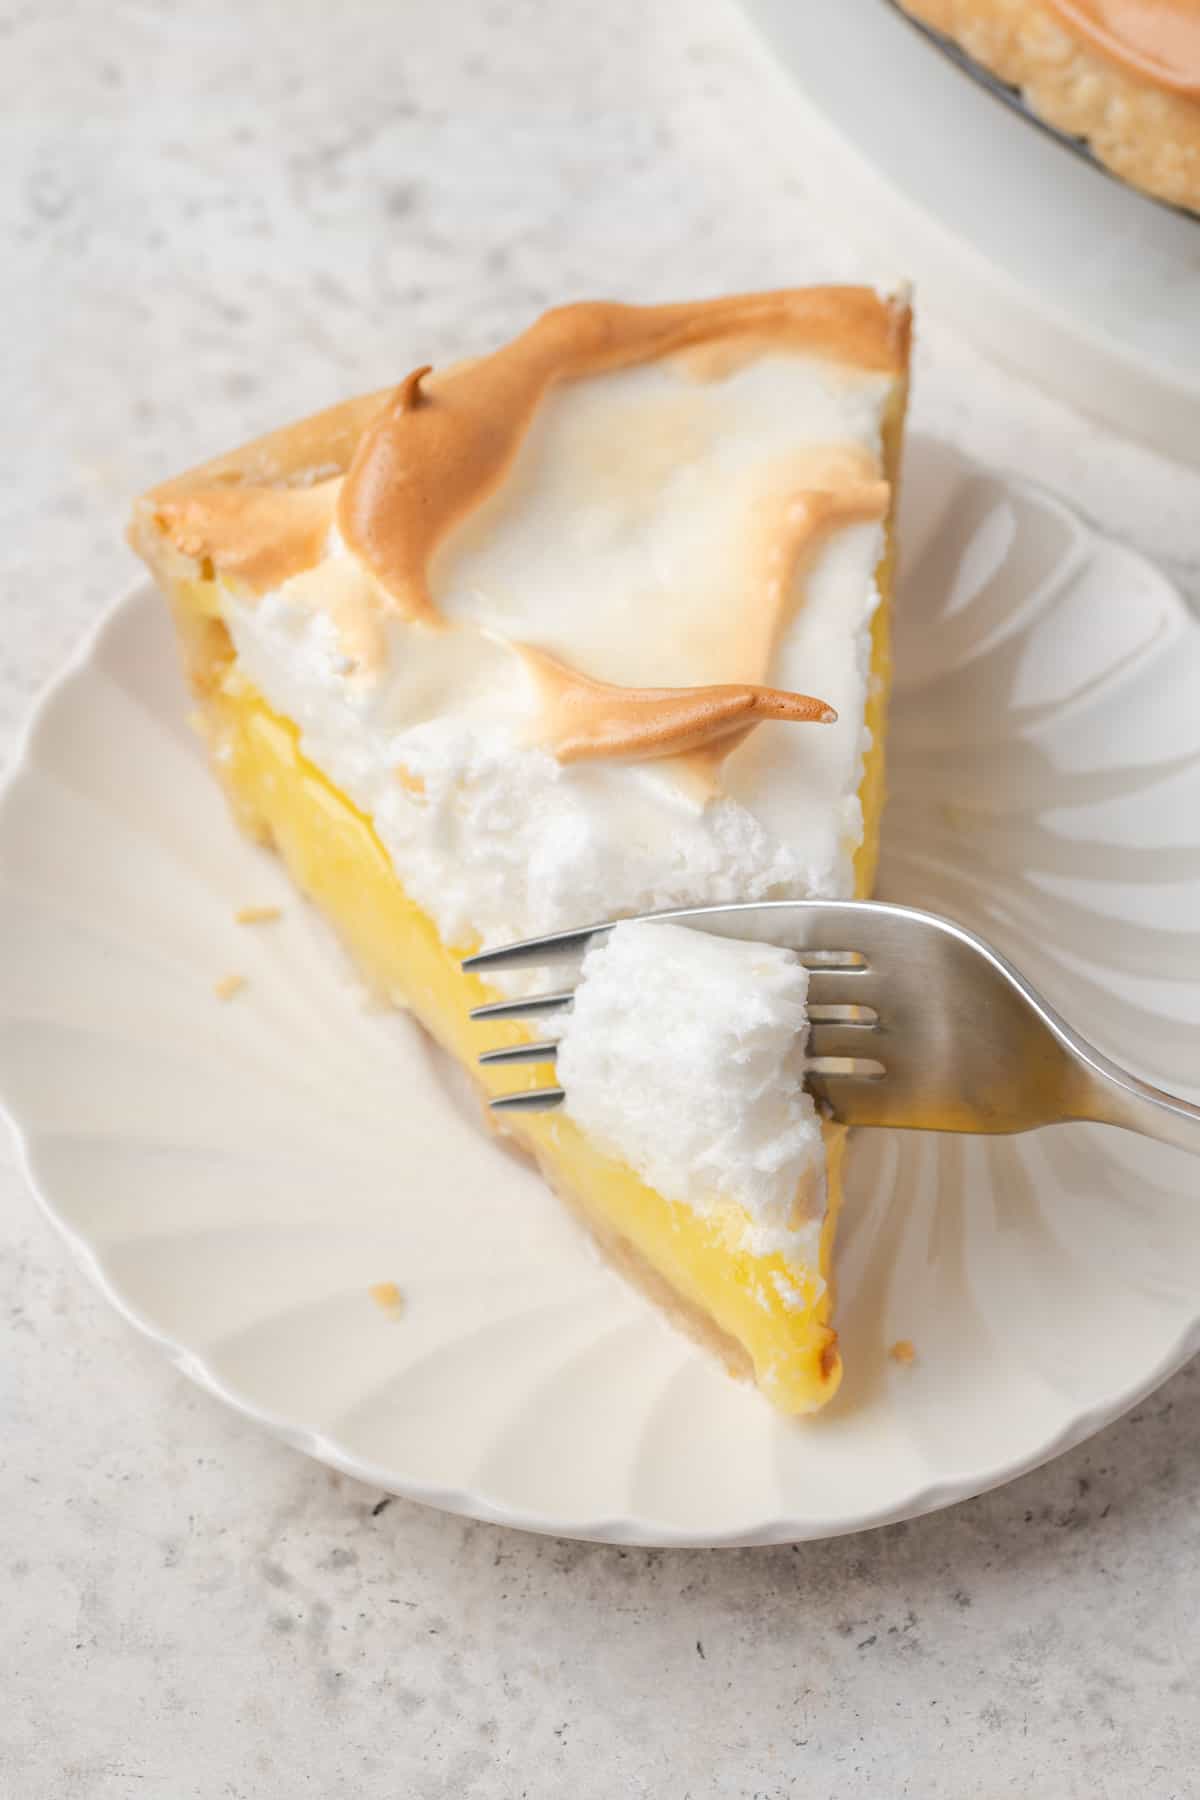 A fork cuts into a slice of gluten free lemon meringue pie on a white plate.